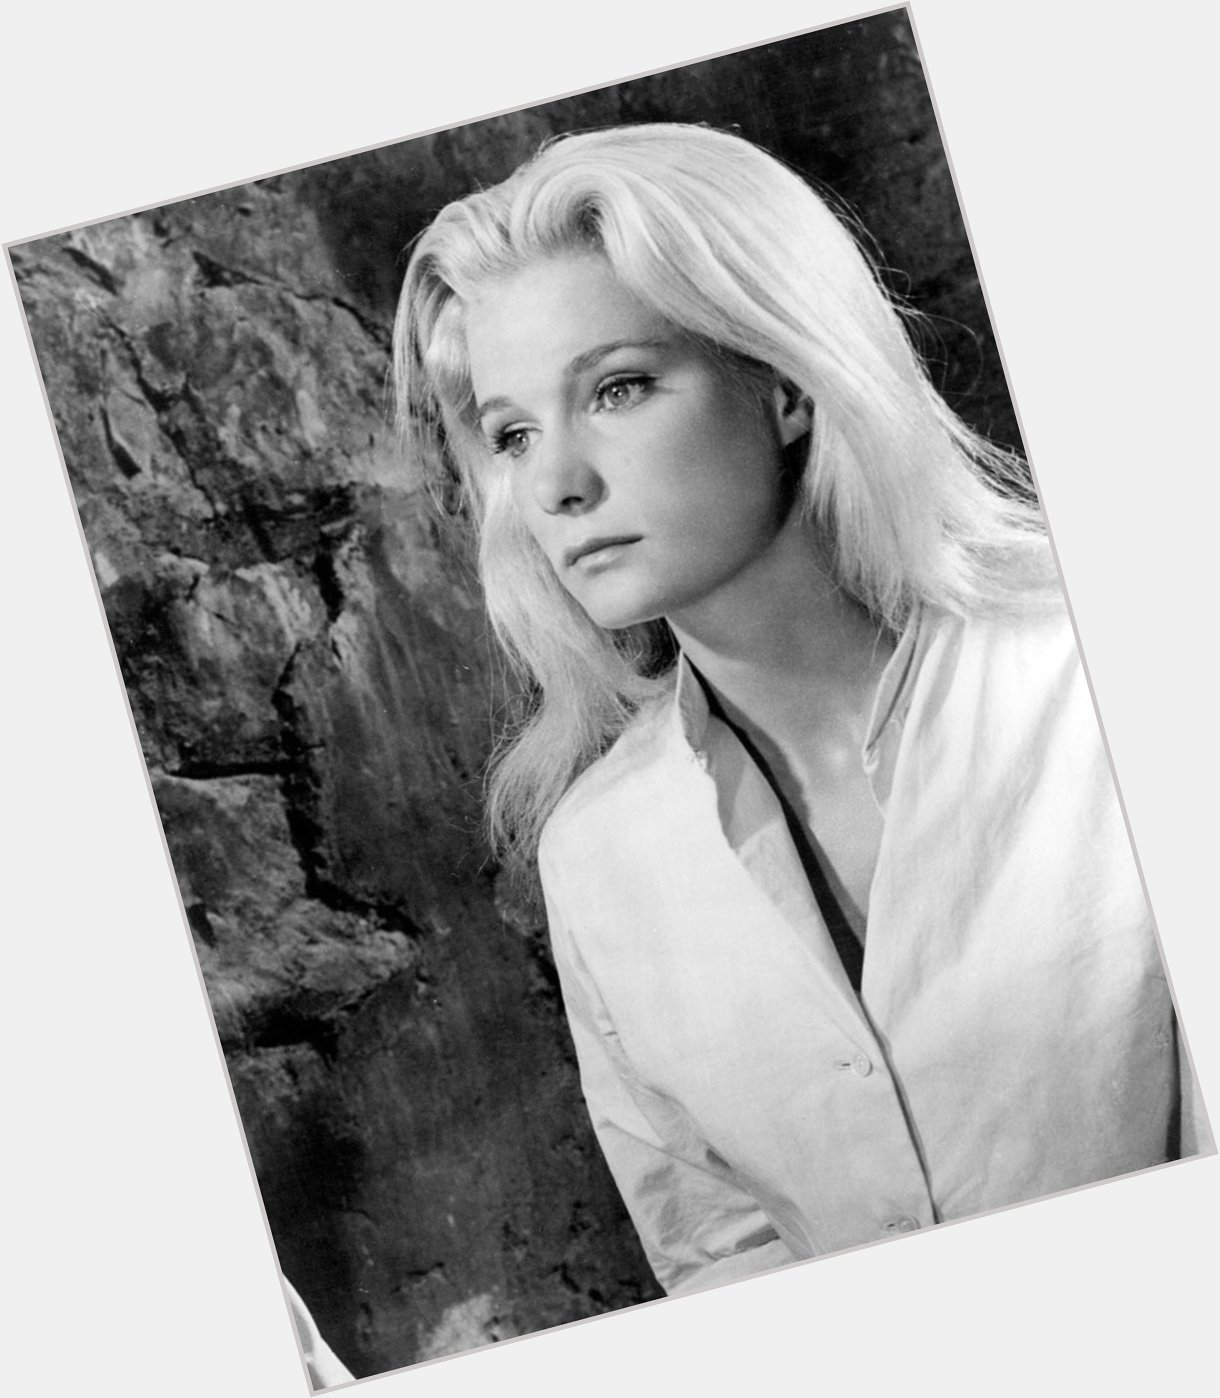 Happy 80th birthday to actress Yvette Mimieux!

Mimieux stars in SNOWBEAST on The Film Detective. 